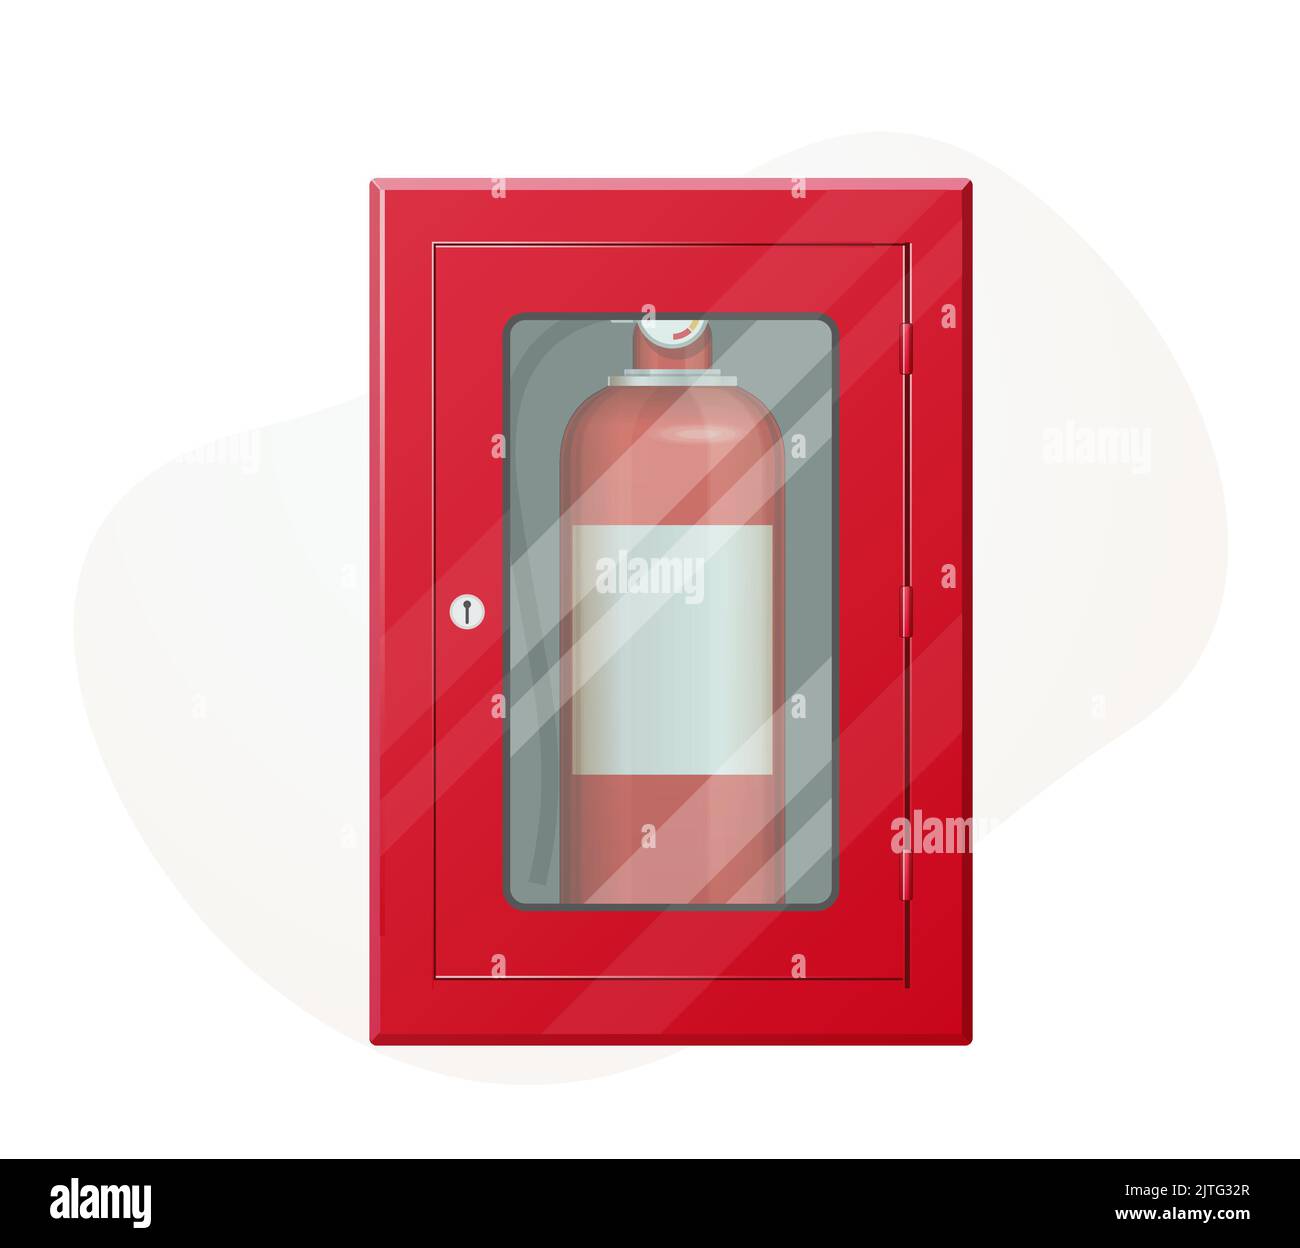 Fire Safety Cabinet - Prevent Fire Accidents - Stock Icon as EPS 10 File Stock Vector